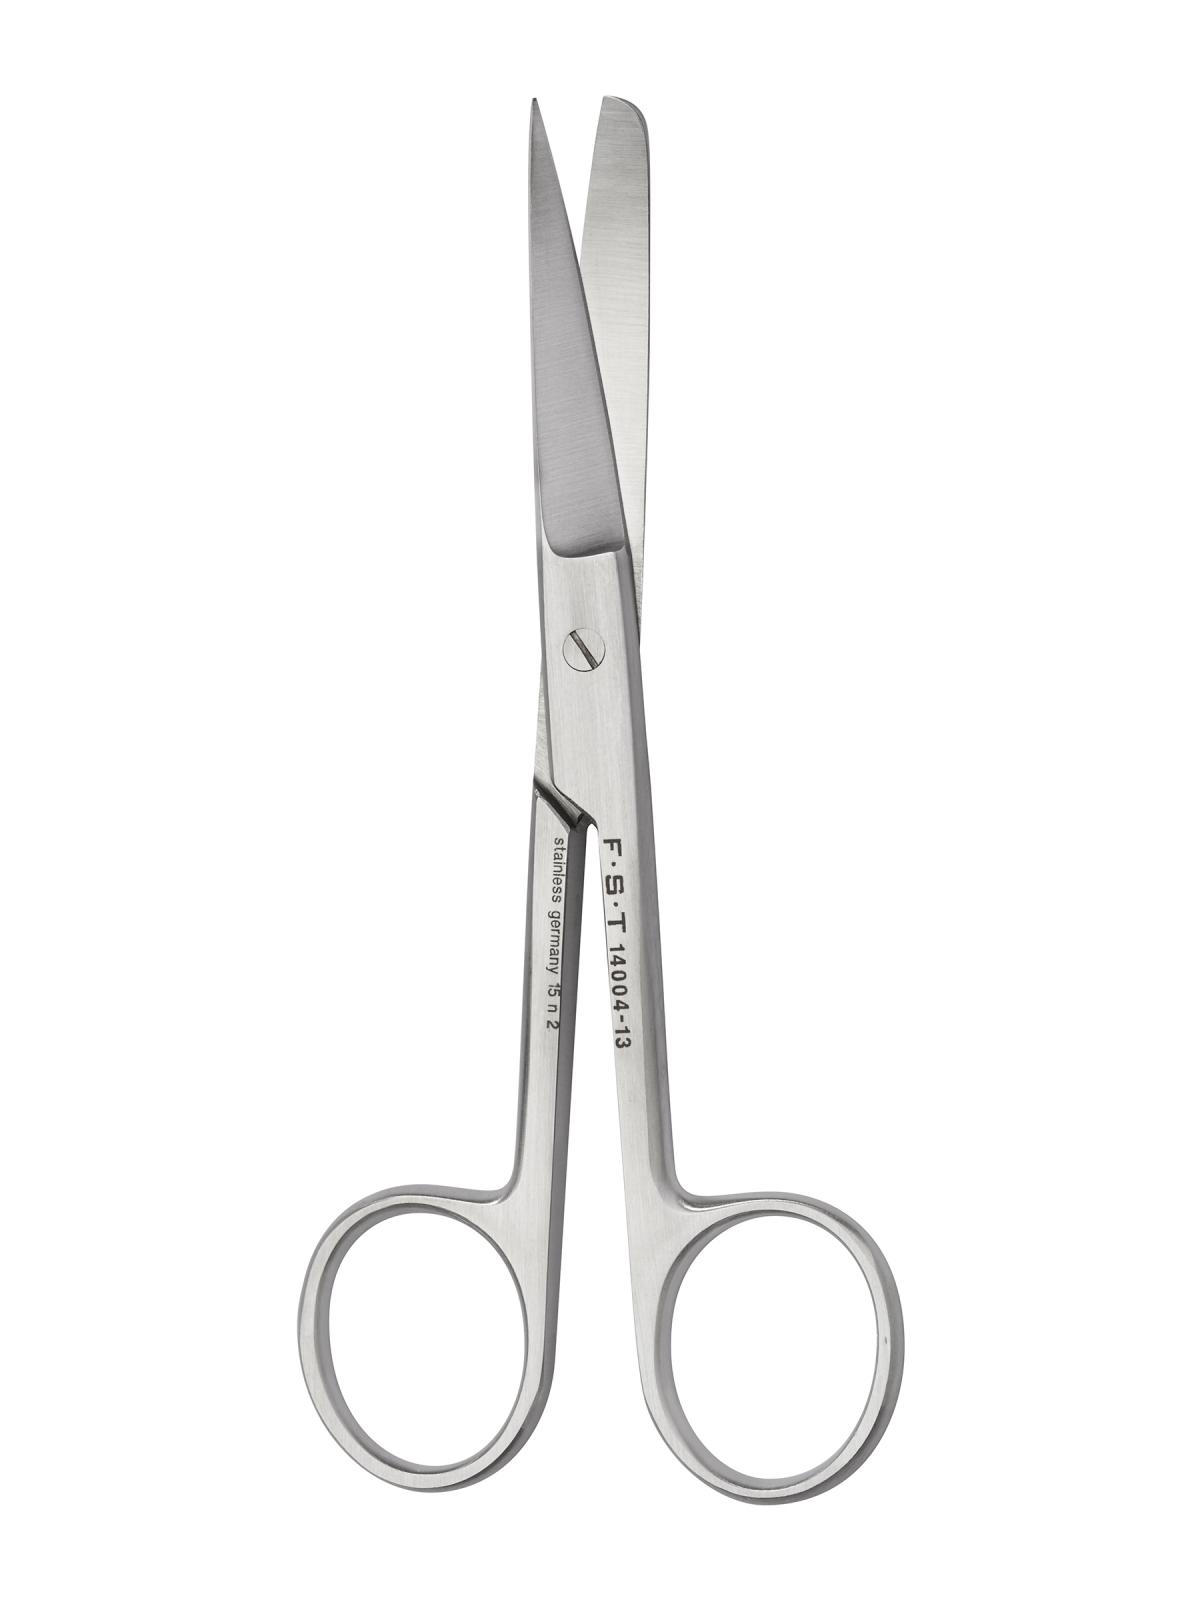 Fine Science Tools Surgical Scissors, Serrated, Stainless Steel